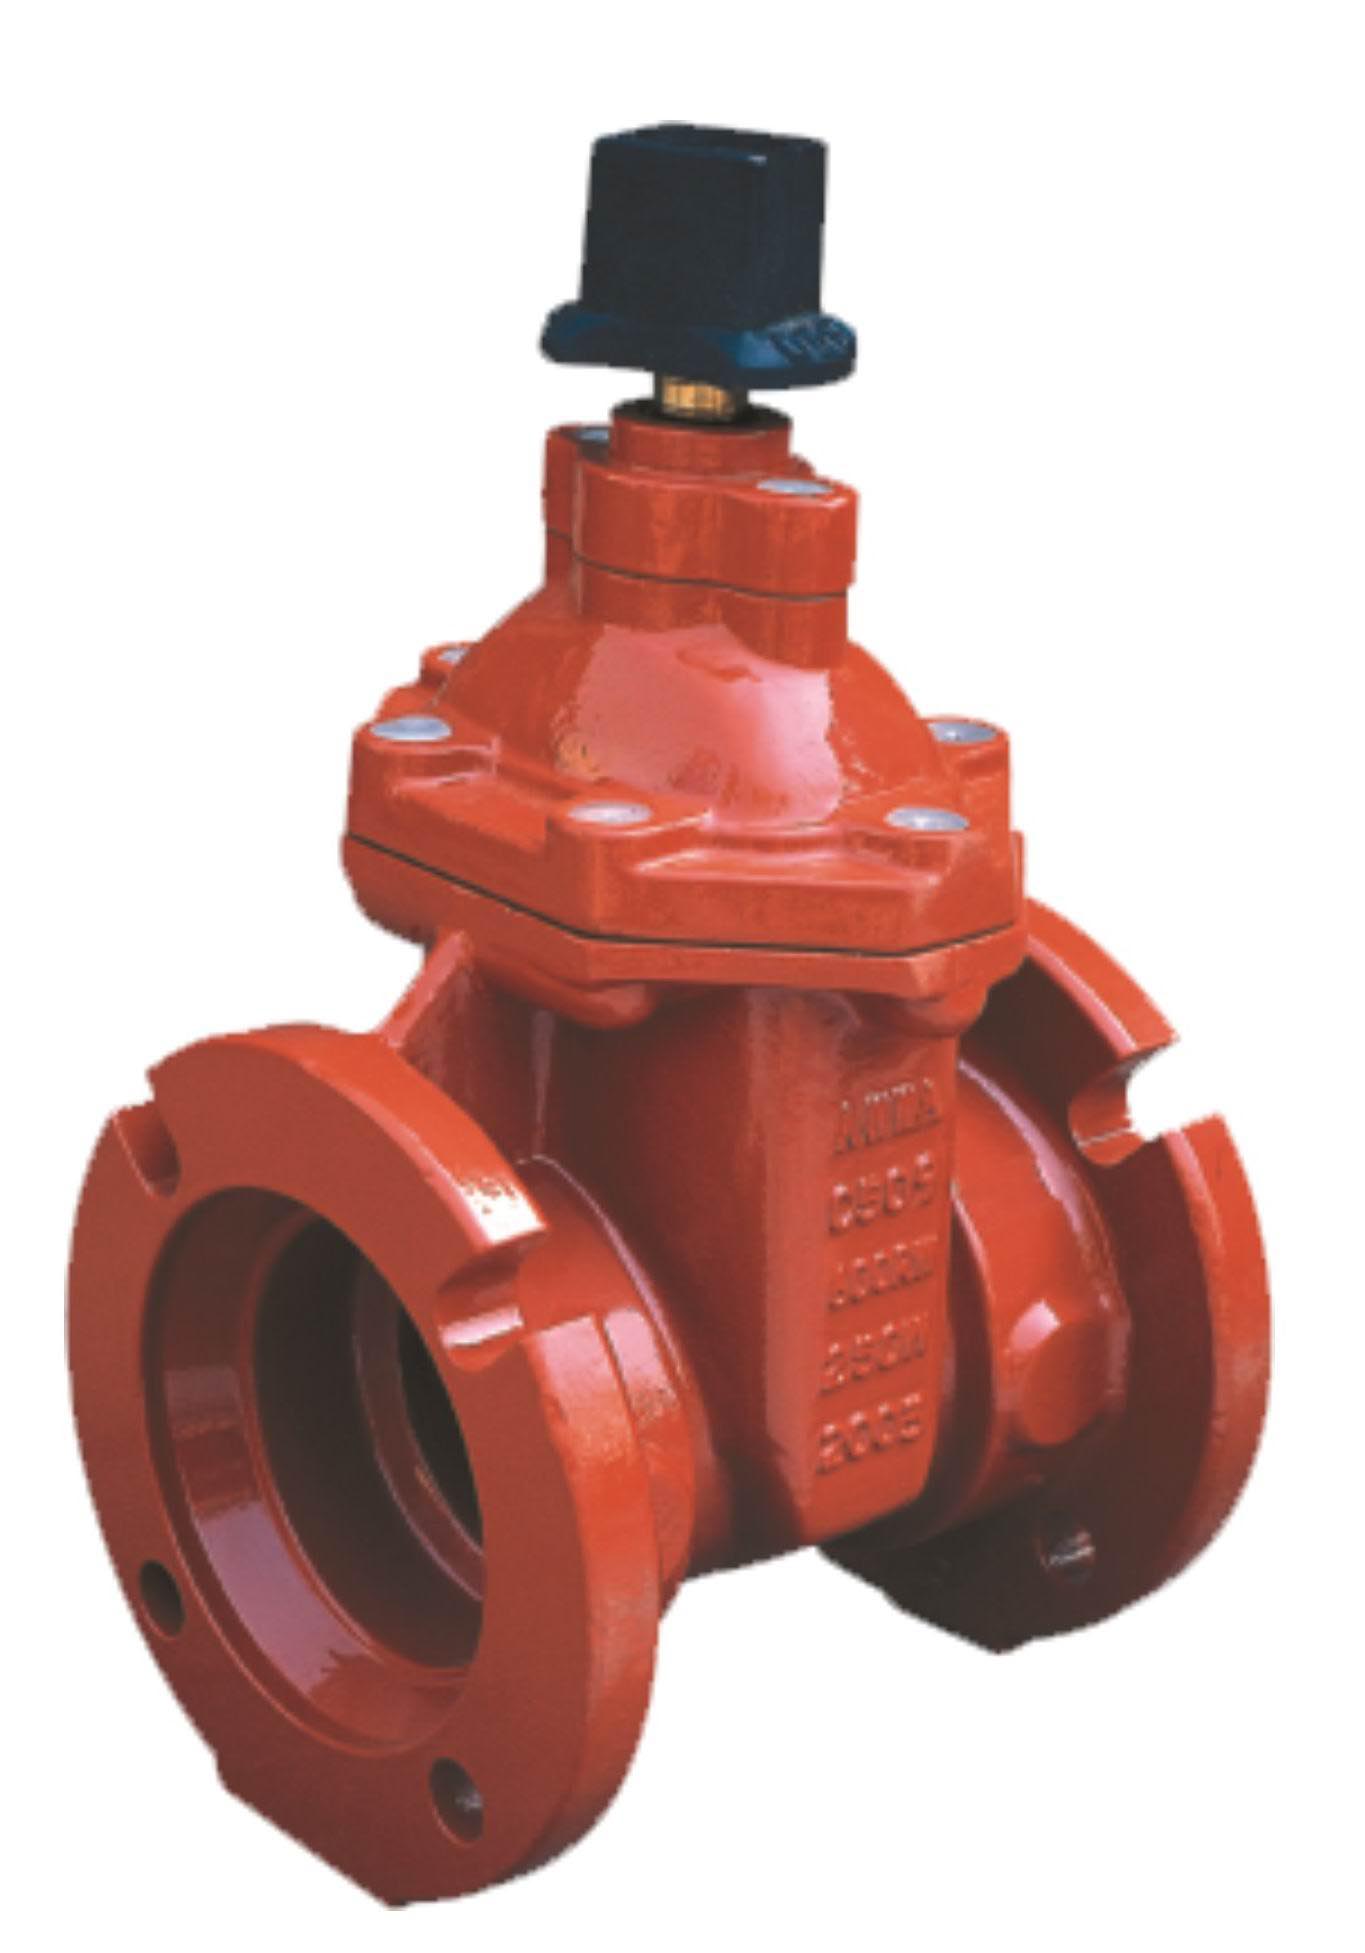 2017 Latest Design Brass Angle Radiator Valve -
 Mechanical Joint Ends NRS Resilient Seated Gate Valves-AWWA C509-UL/FM Approval – Kingnor